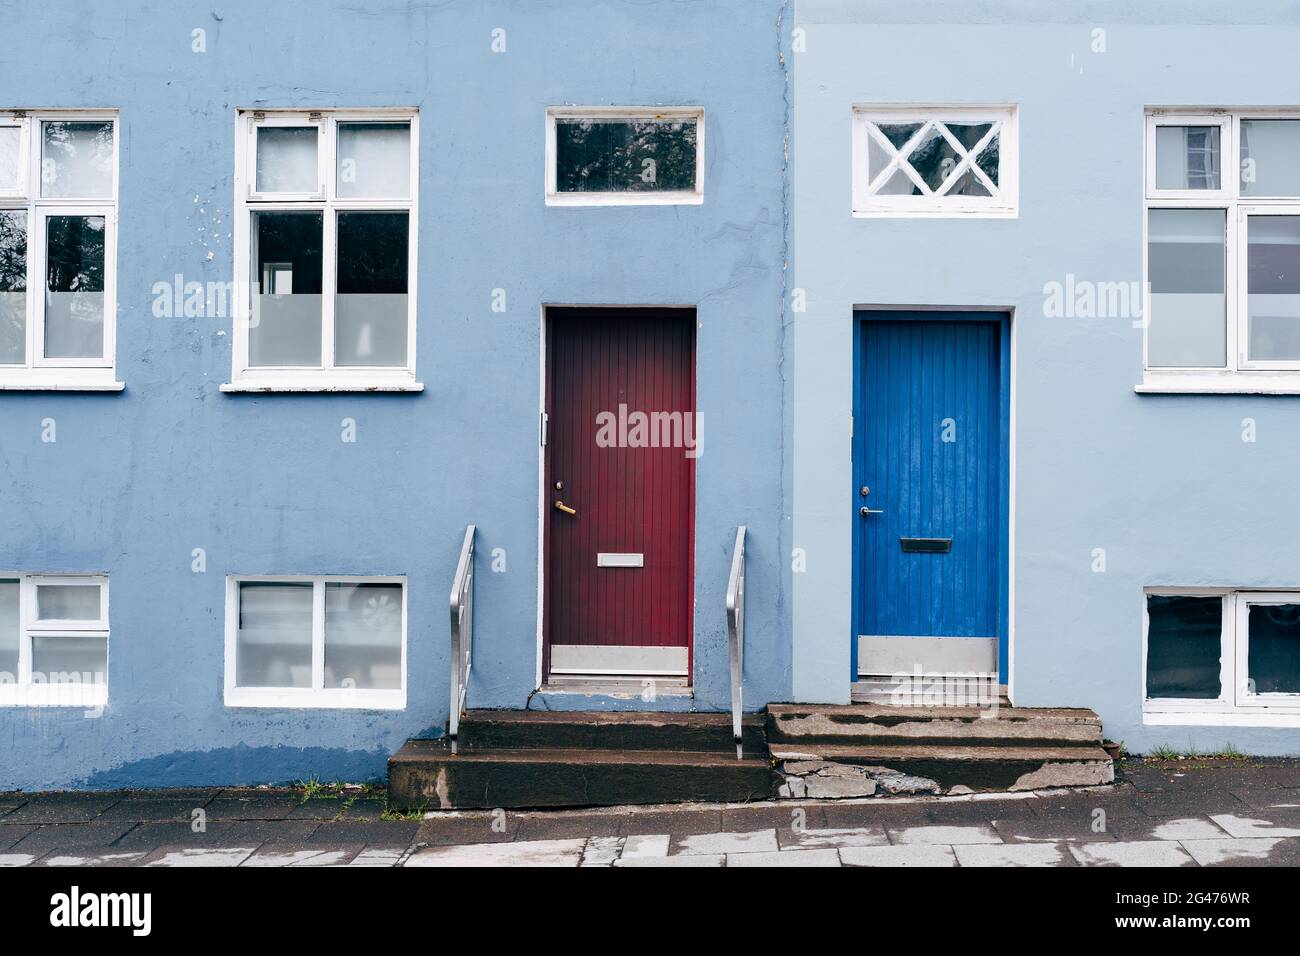 A two-tone building in blue and light blue with two rectangular doors in blue and burgundy and windows of different sizes. Stock Photo